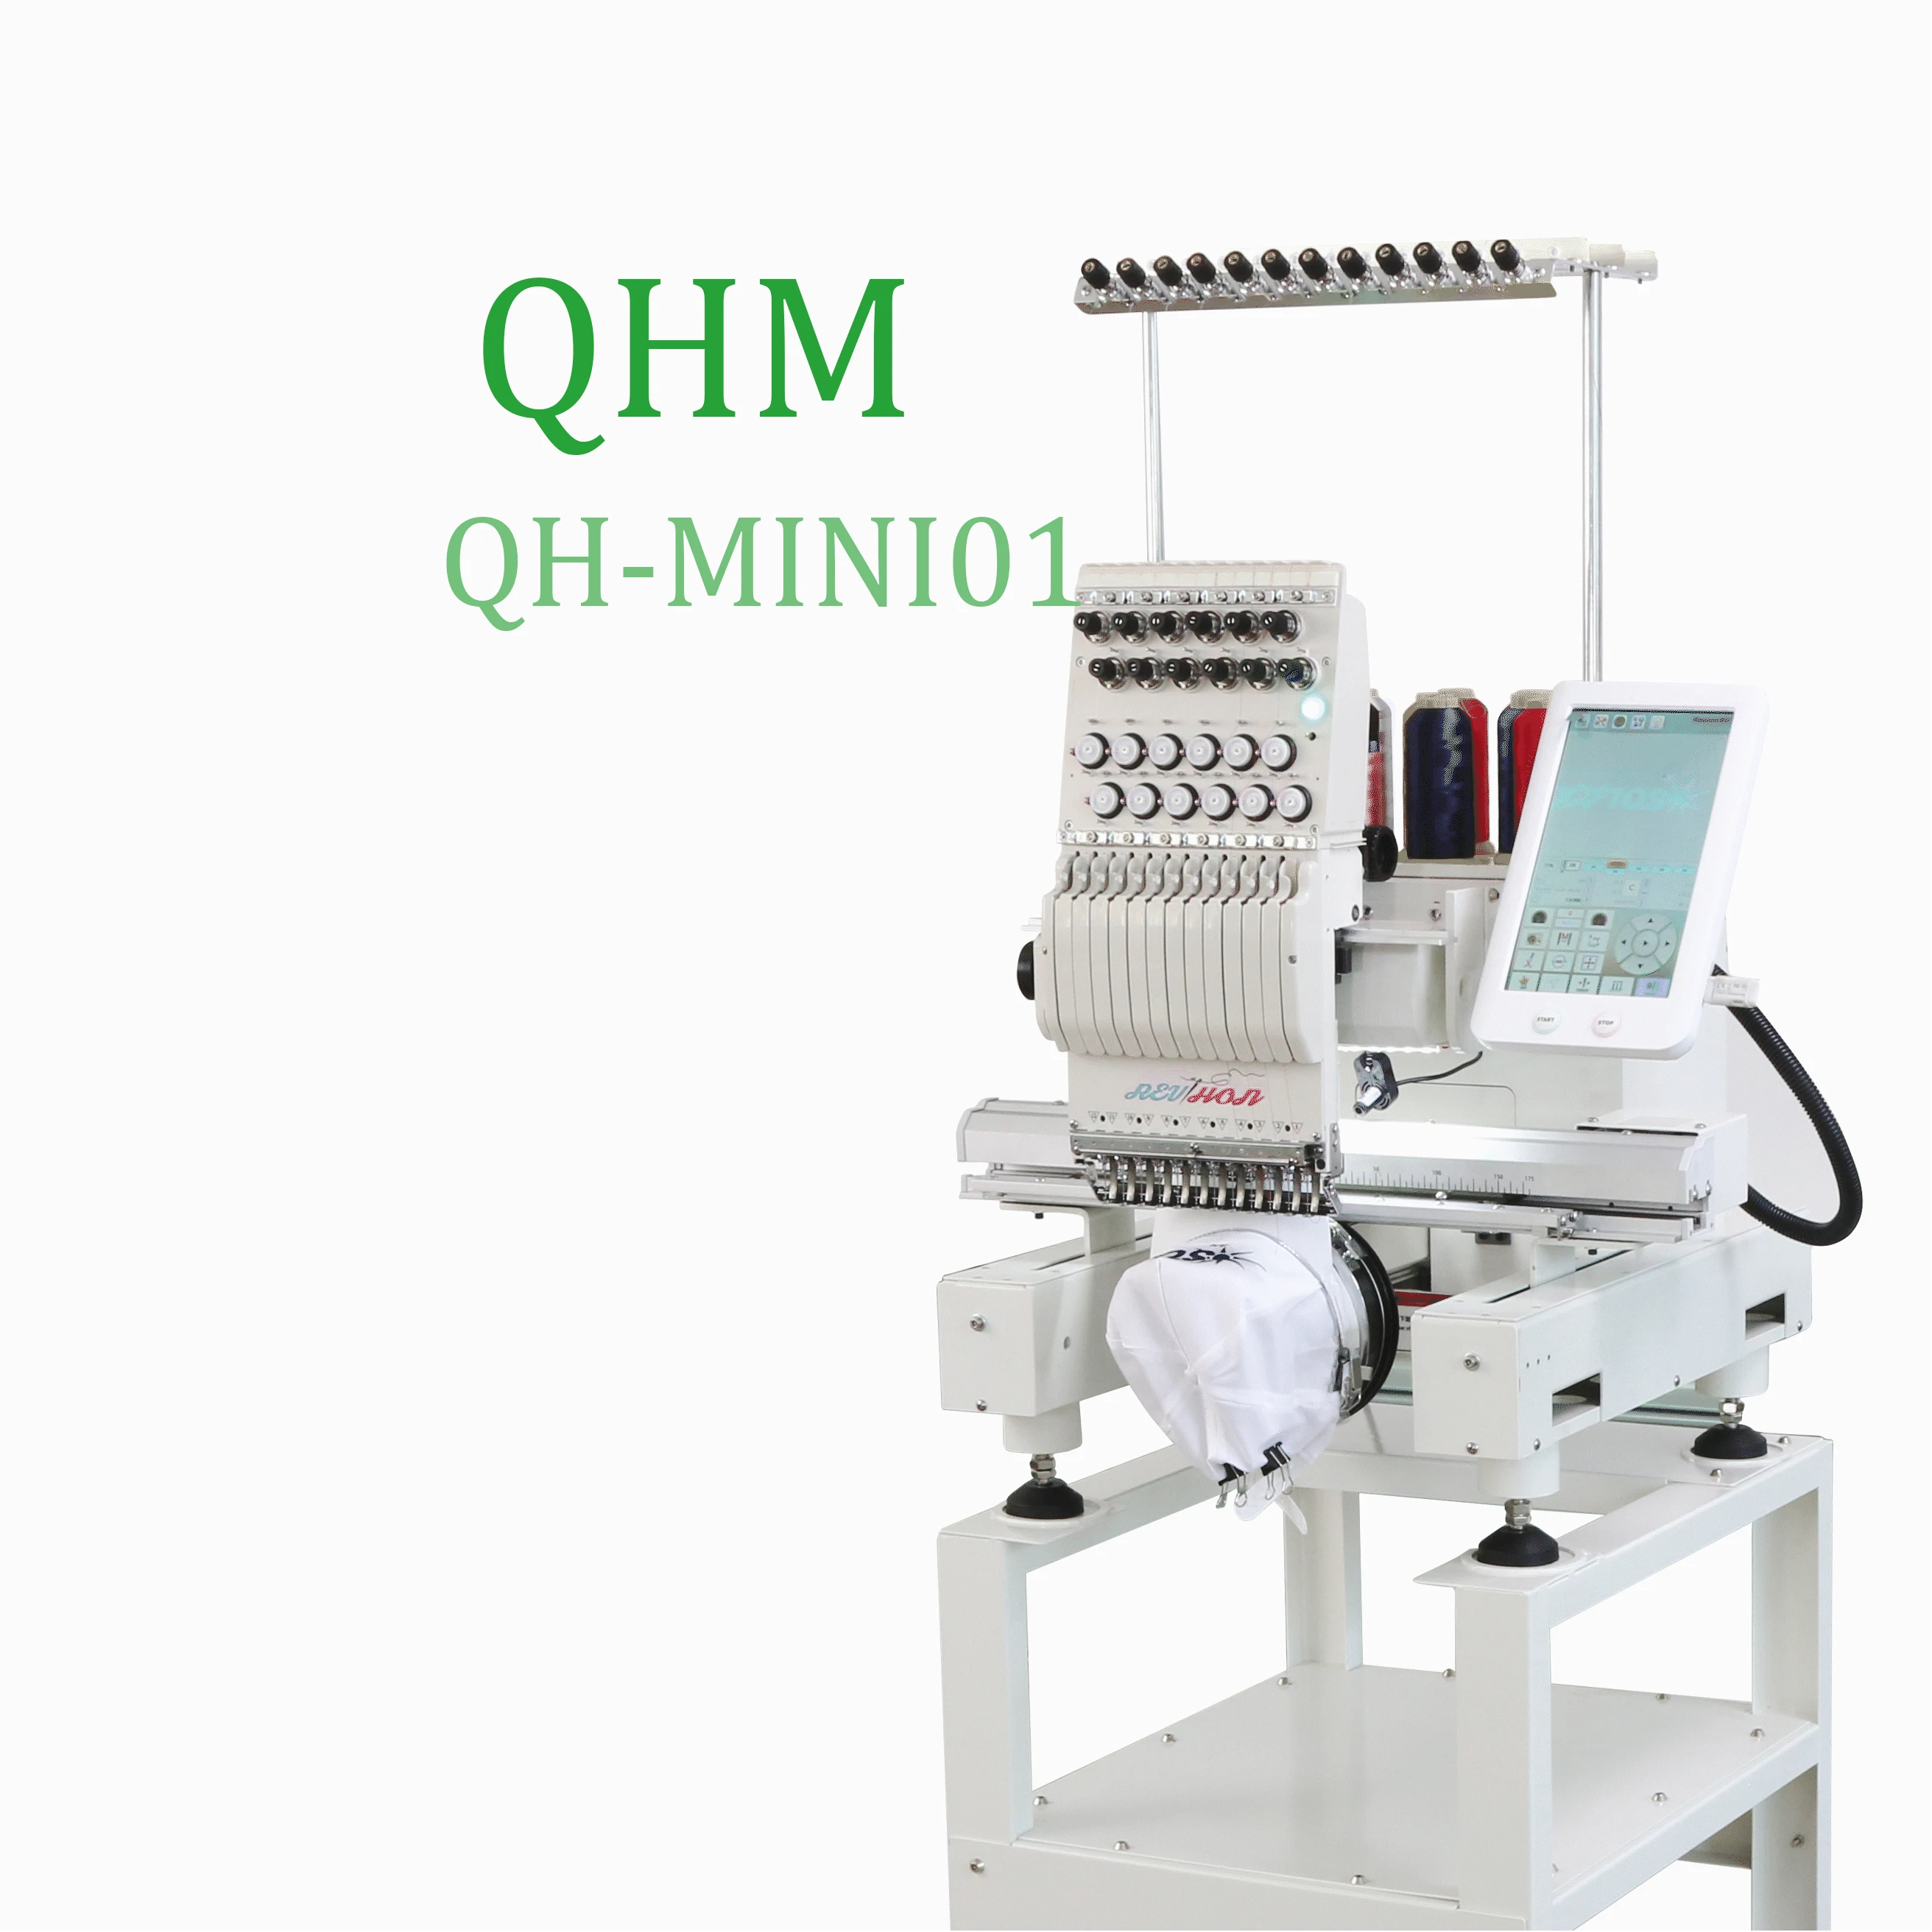 Mini Single Head Lace Making Commercial Machine Embroidery Cloth Embroidery  Machinery - China Brother Embroidery Machine, Electro Domesticos PARA EL  Hogar